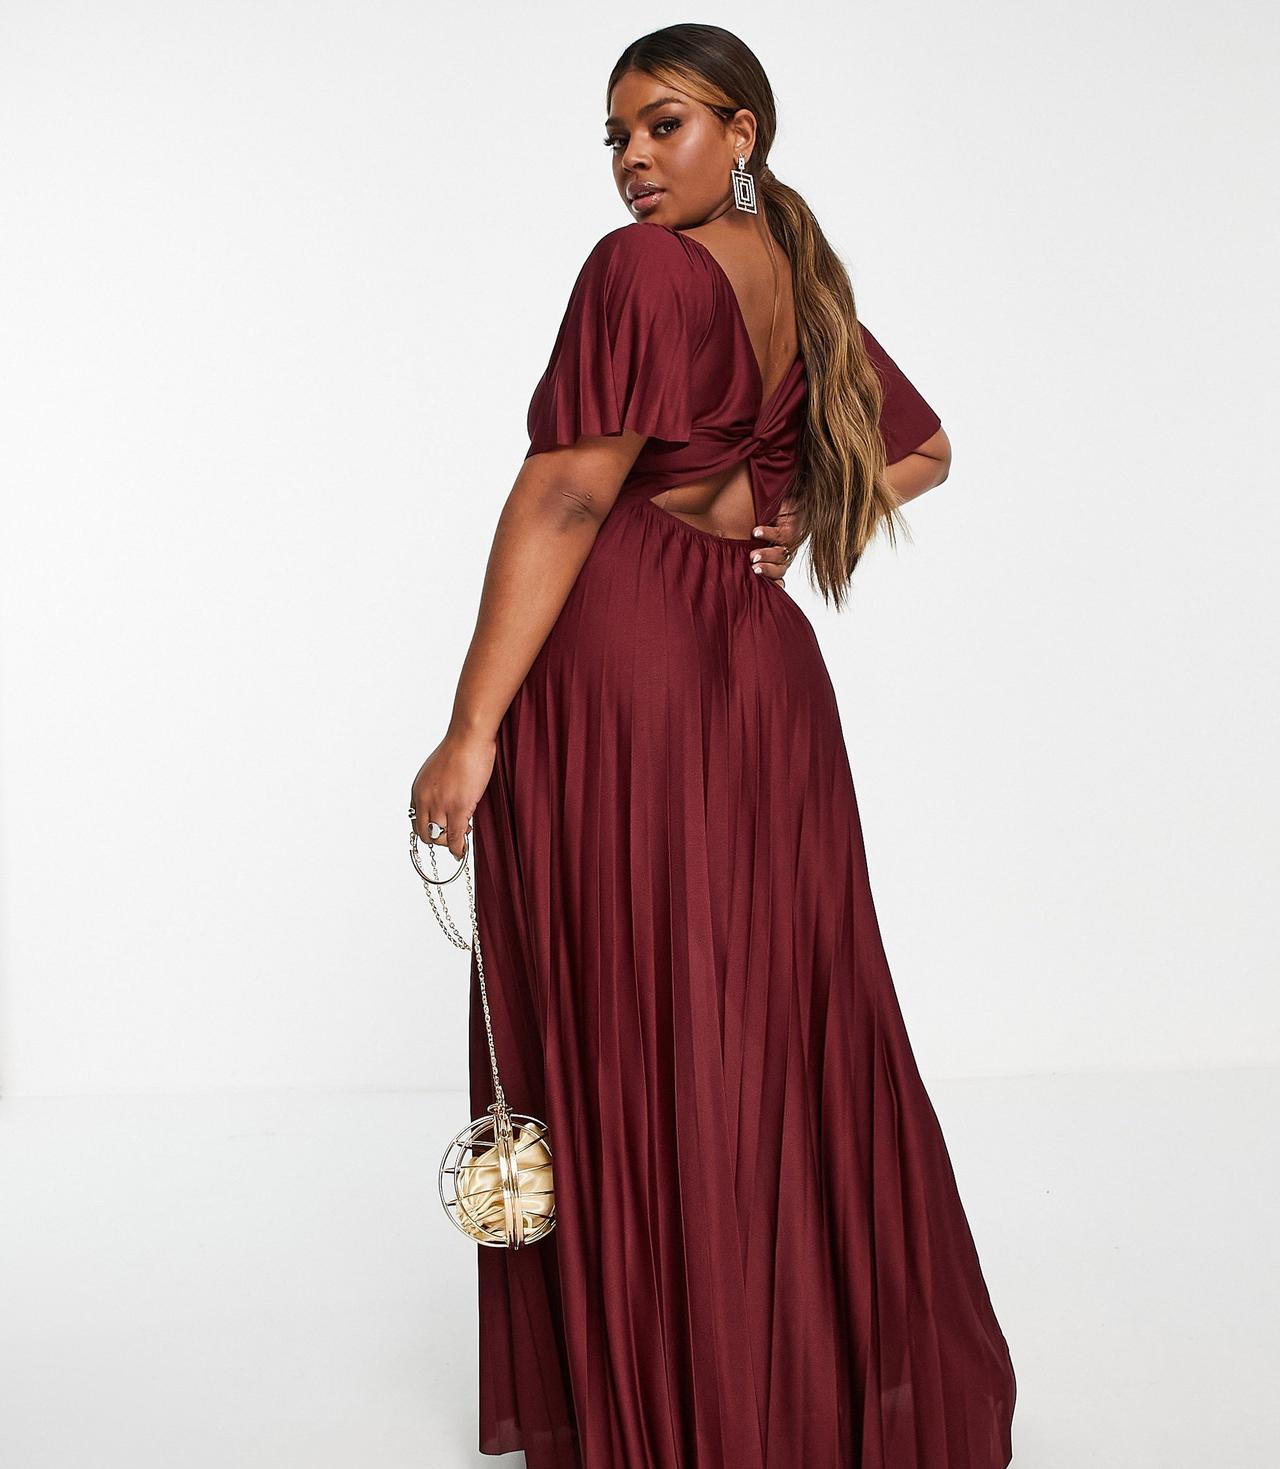 The Best Plus Size Bridesmaid Dresses: 34 Gorgeous Gowns for